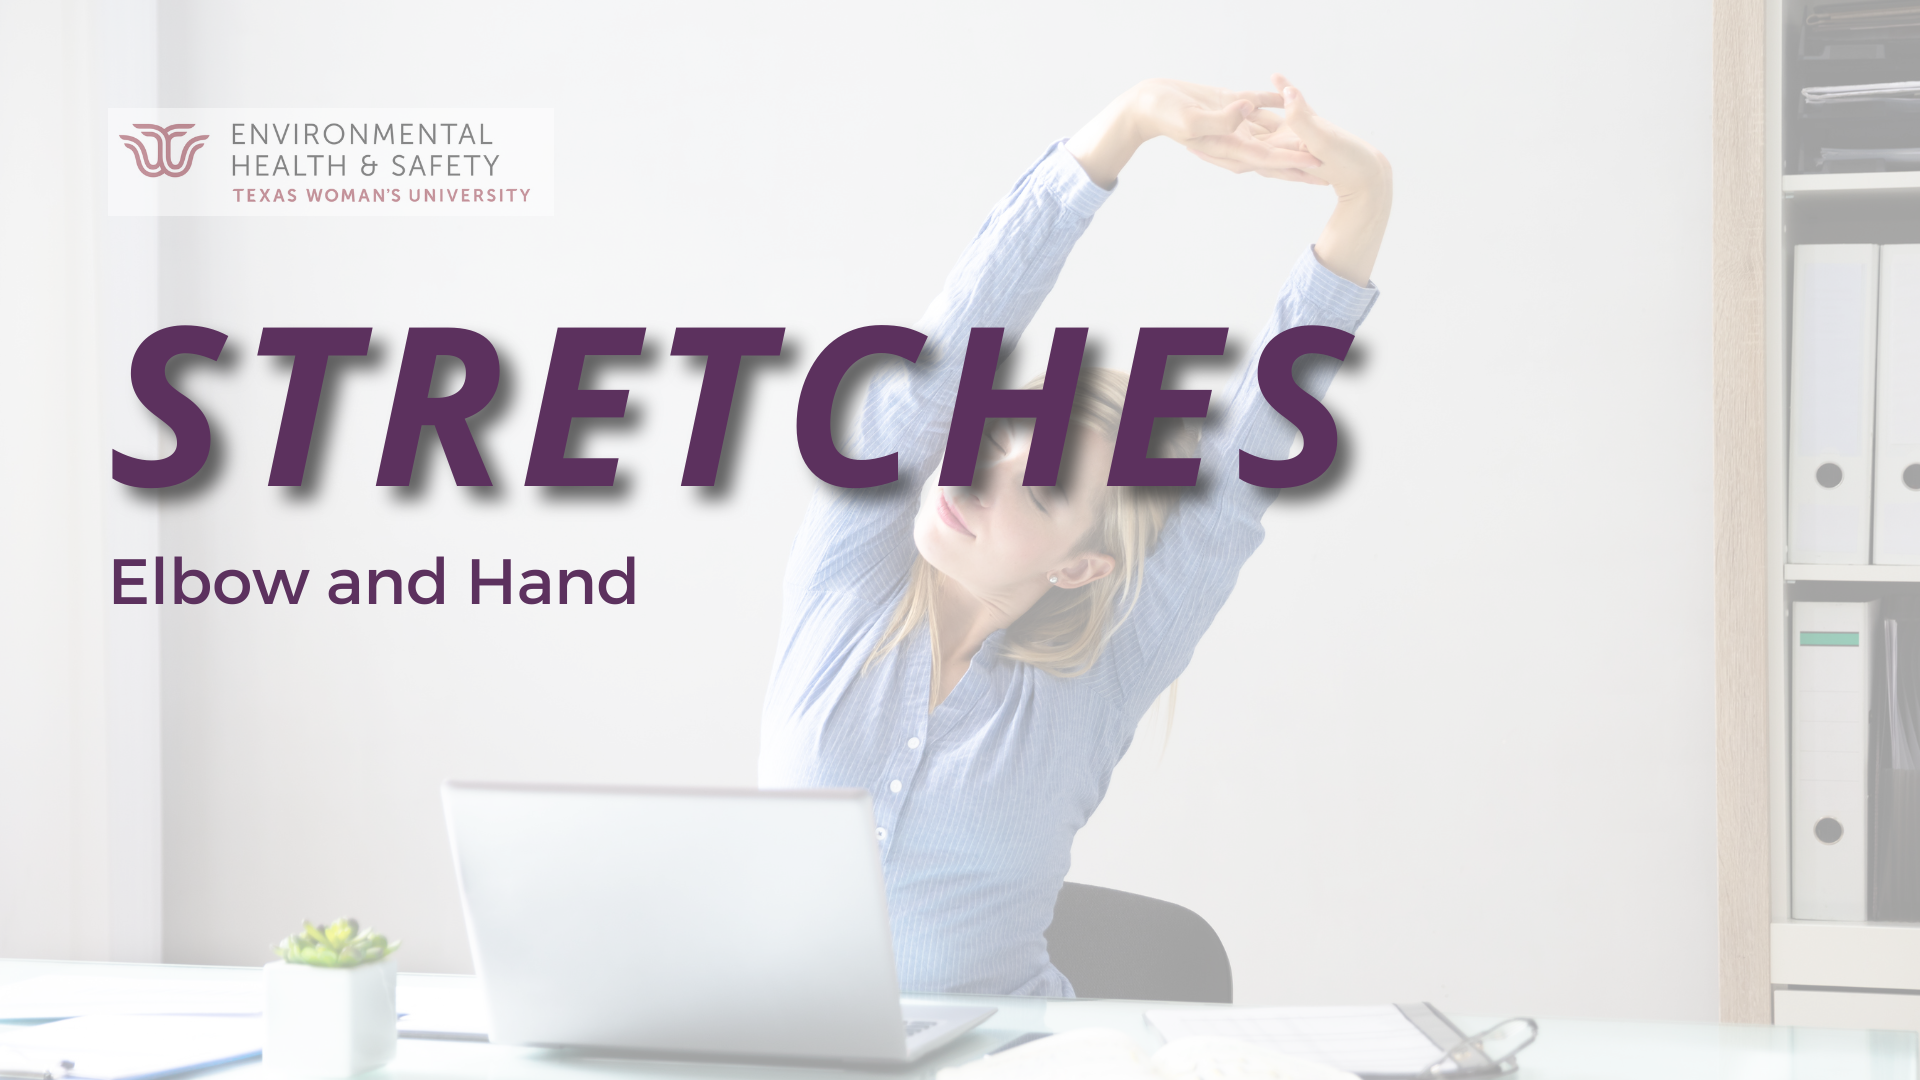 Background is a photo of a woman in a blue shirt sitting at a desk with a laptop and stretching with her arms overhead. In the foreground is text that says "Stretches: Elbow and Hand" and has the TWU Environmental Health and Safety logo